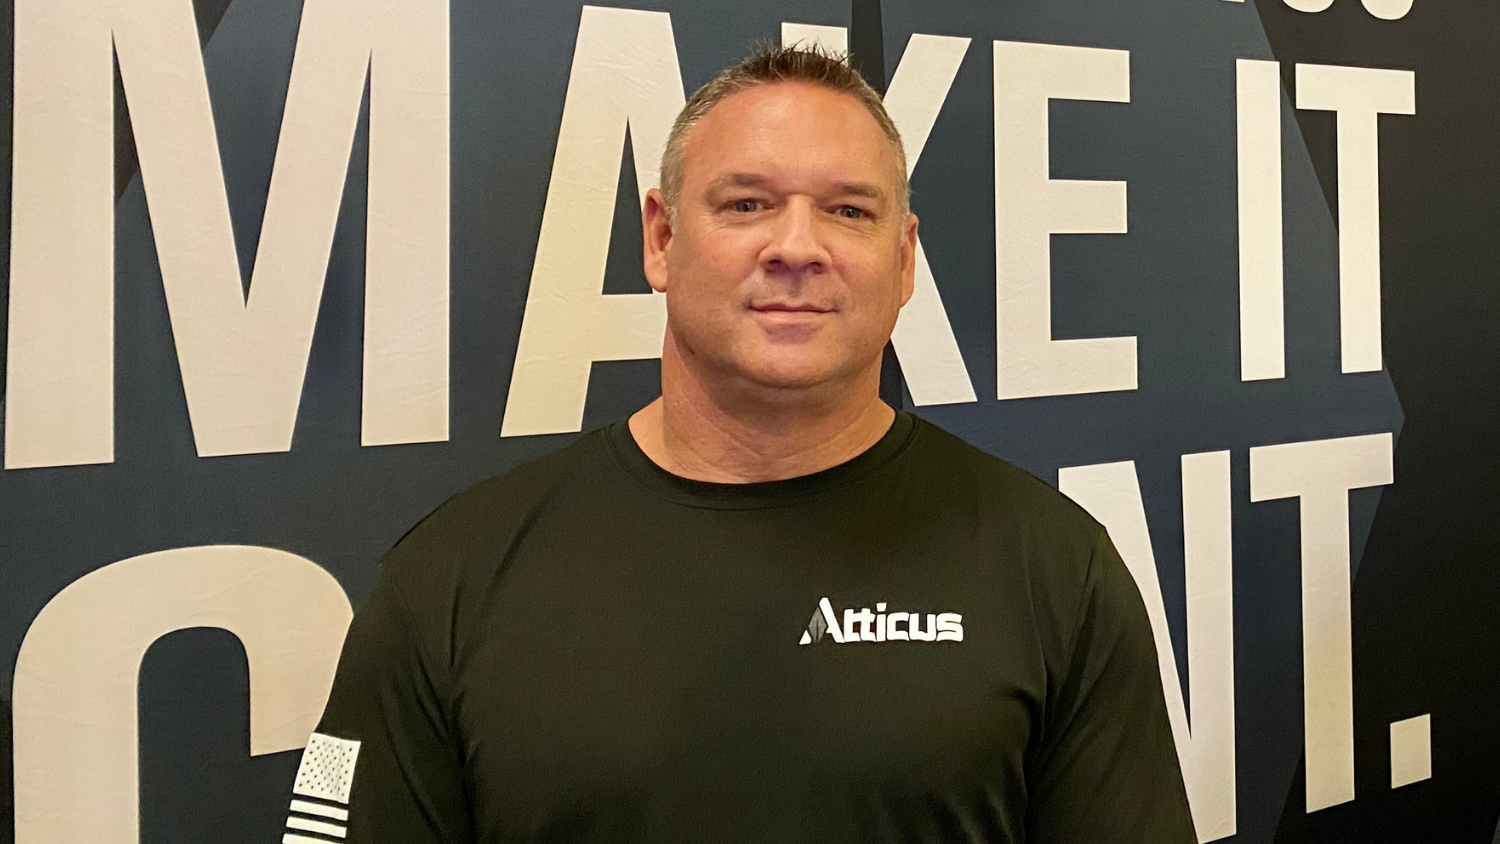 Randy Canady, Founder and CEO of Atticus